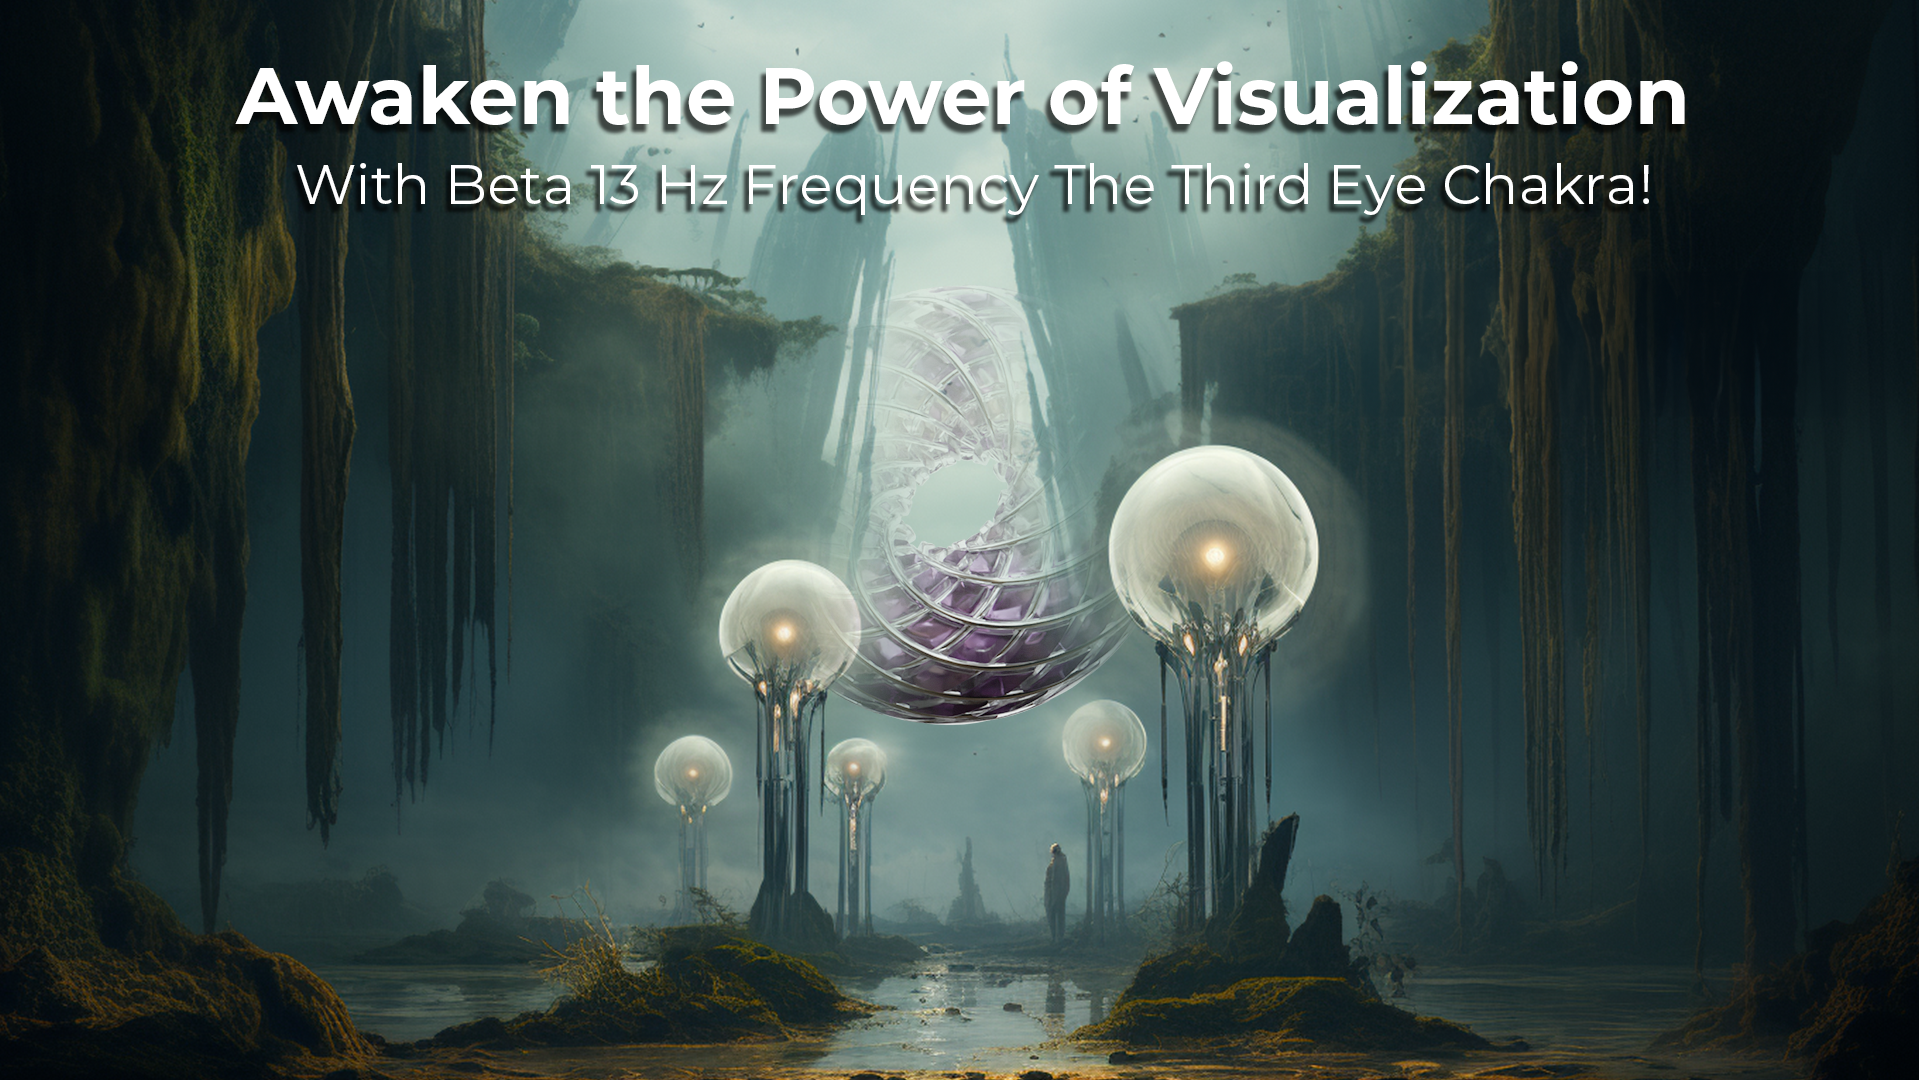 Awaken the Power of Visualization with Beta 13 Hz Frequency The Third Eye Chakra